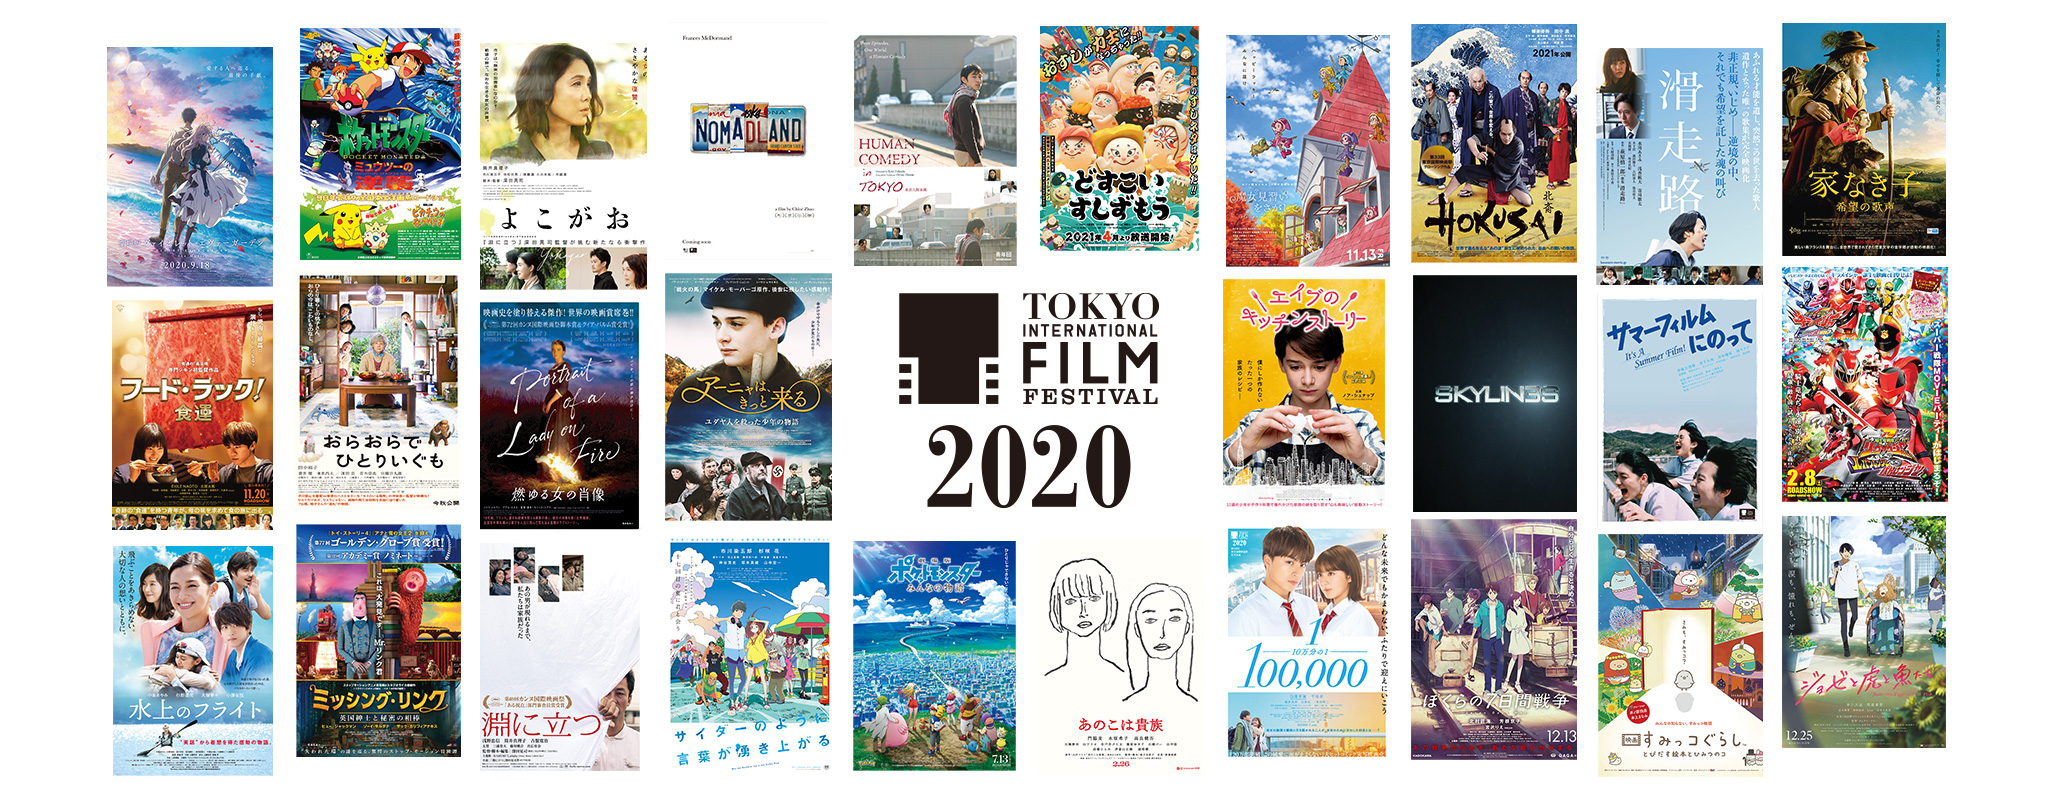 Special Screenings: This section, which premieres the latest films before being released in Japan, will screen the closing film this year as well as monumental and topical films. There will also be guest appearances by film stars and crew, which will surely enliven the festival.